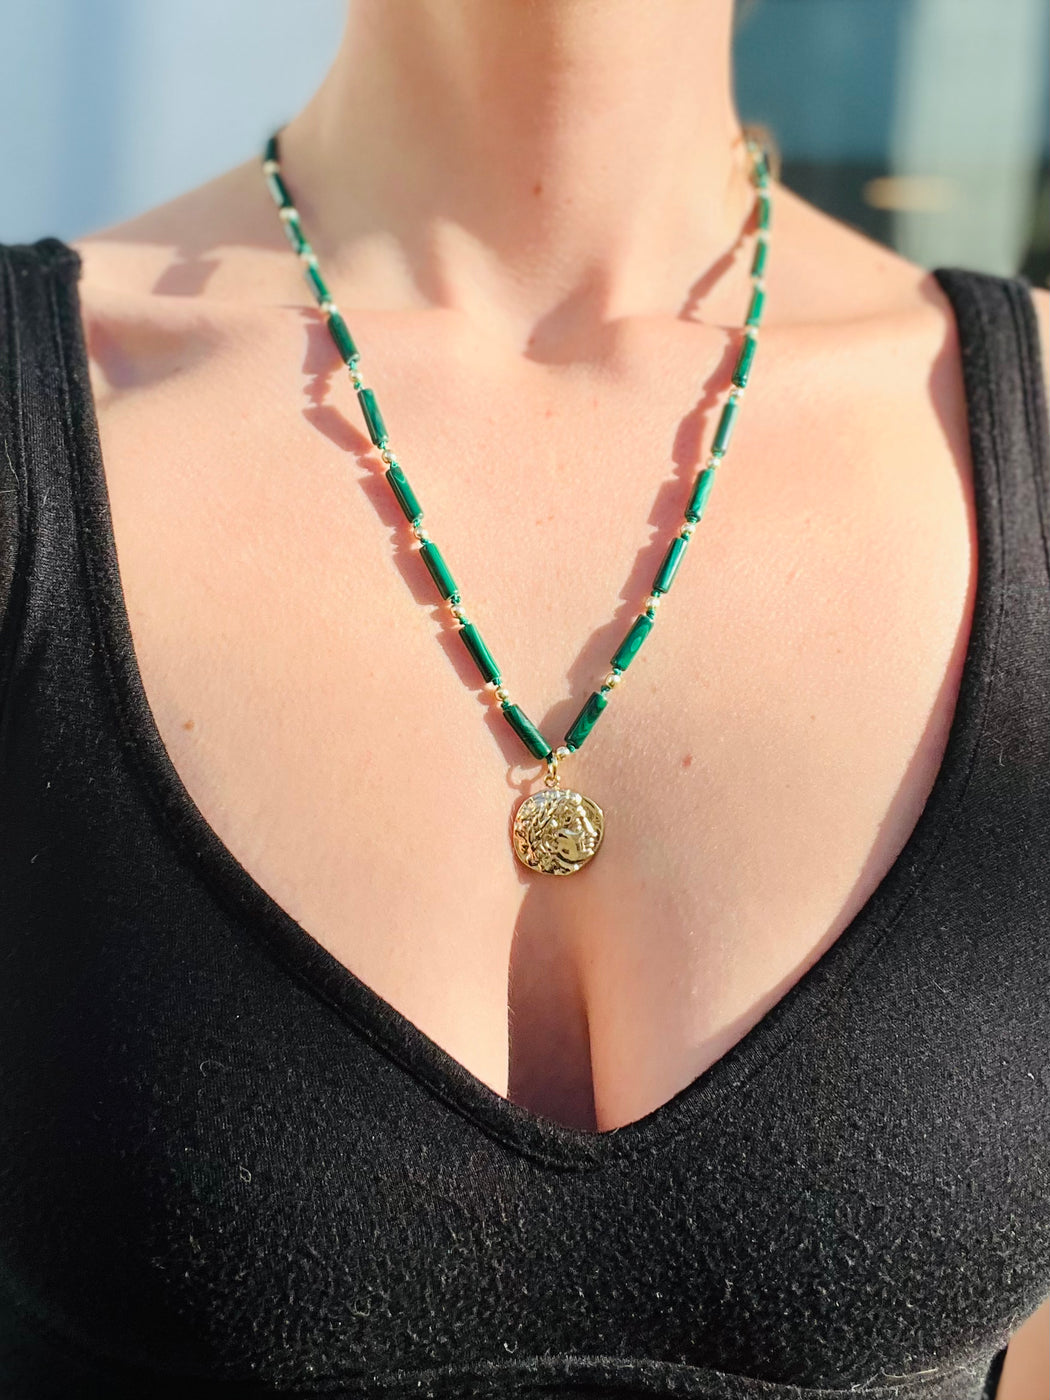 Rise from the ashes. Face your shadows & alchemize the darkness into light with the help of Malachite - the stone of Transformation. Hand knotted on silk chord, Roman gold coin with gold fill beads to light the way ~ 22" necklace designed by Carrie Marill